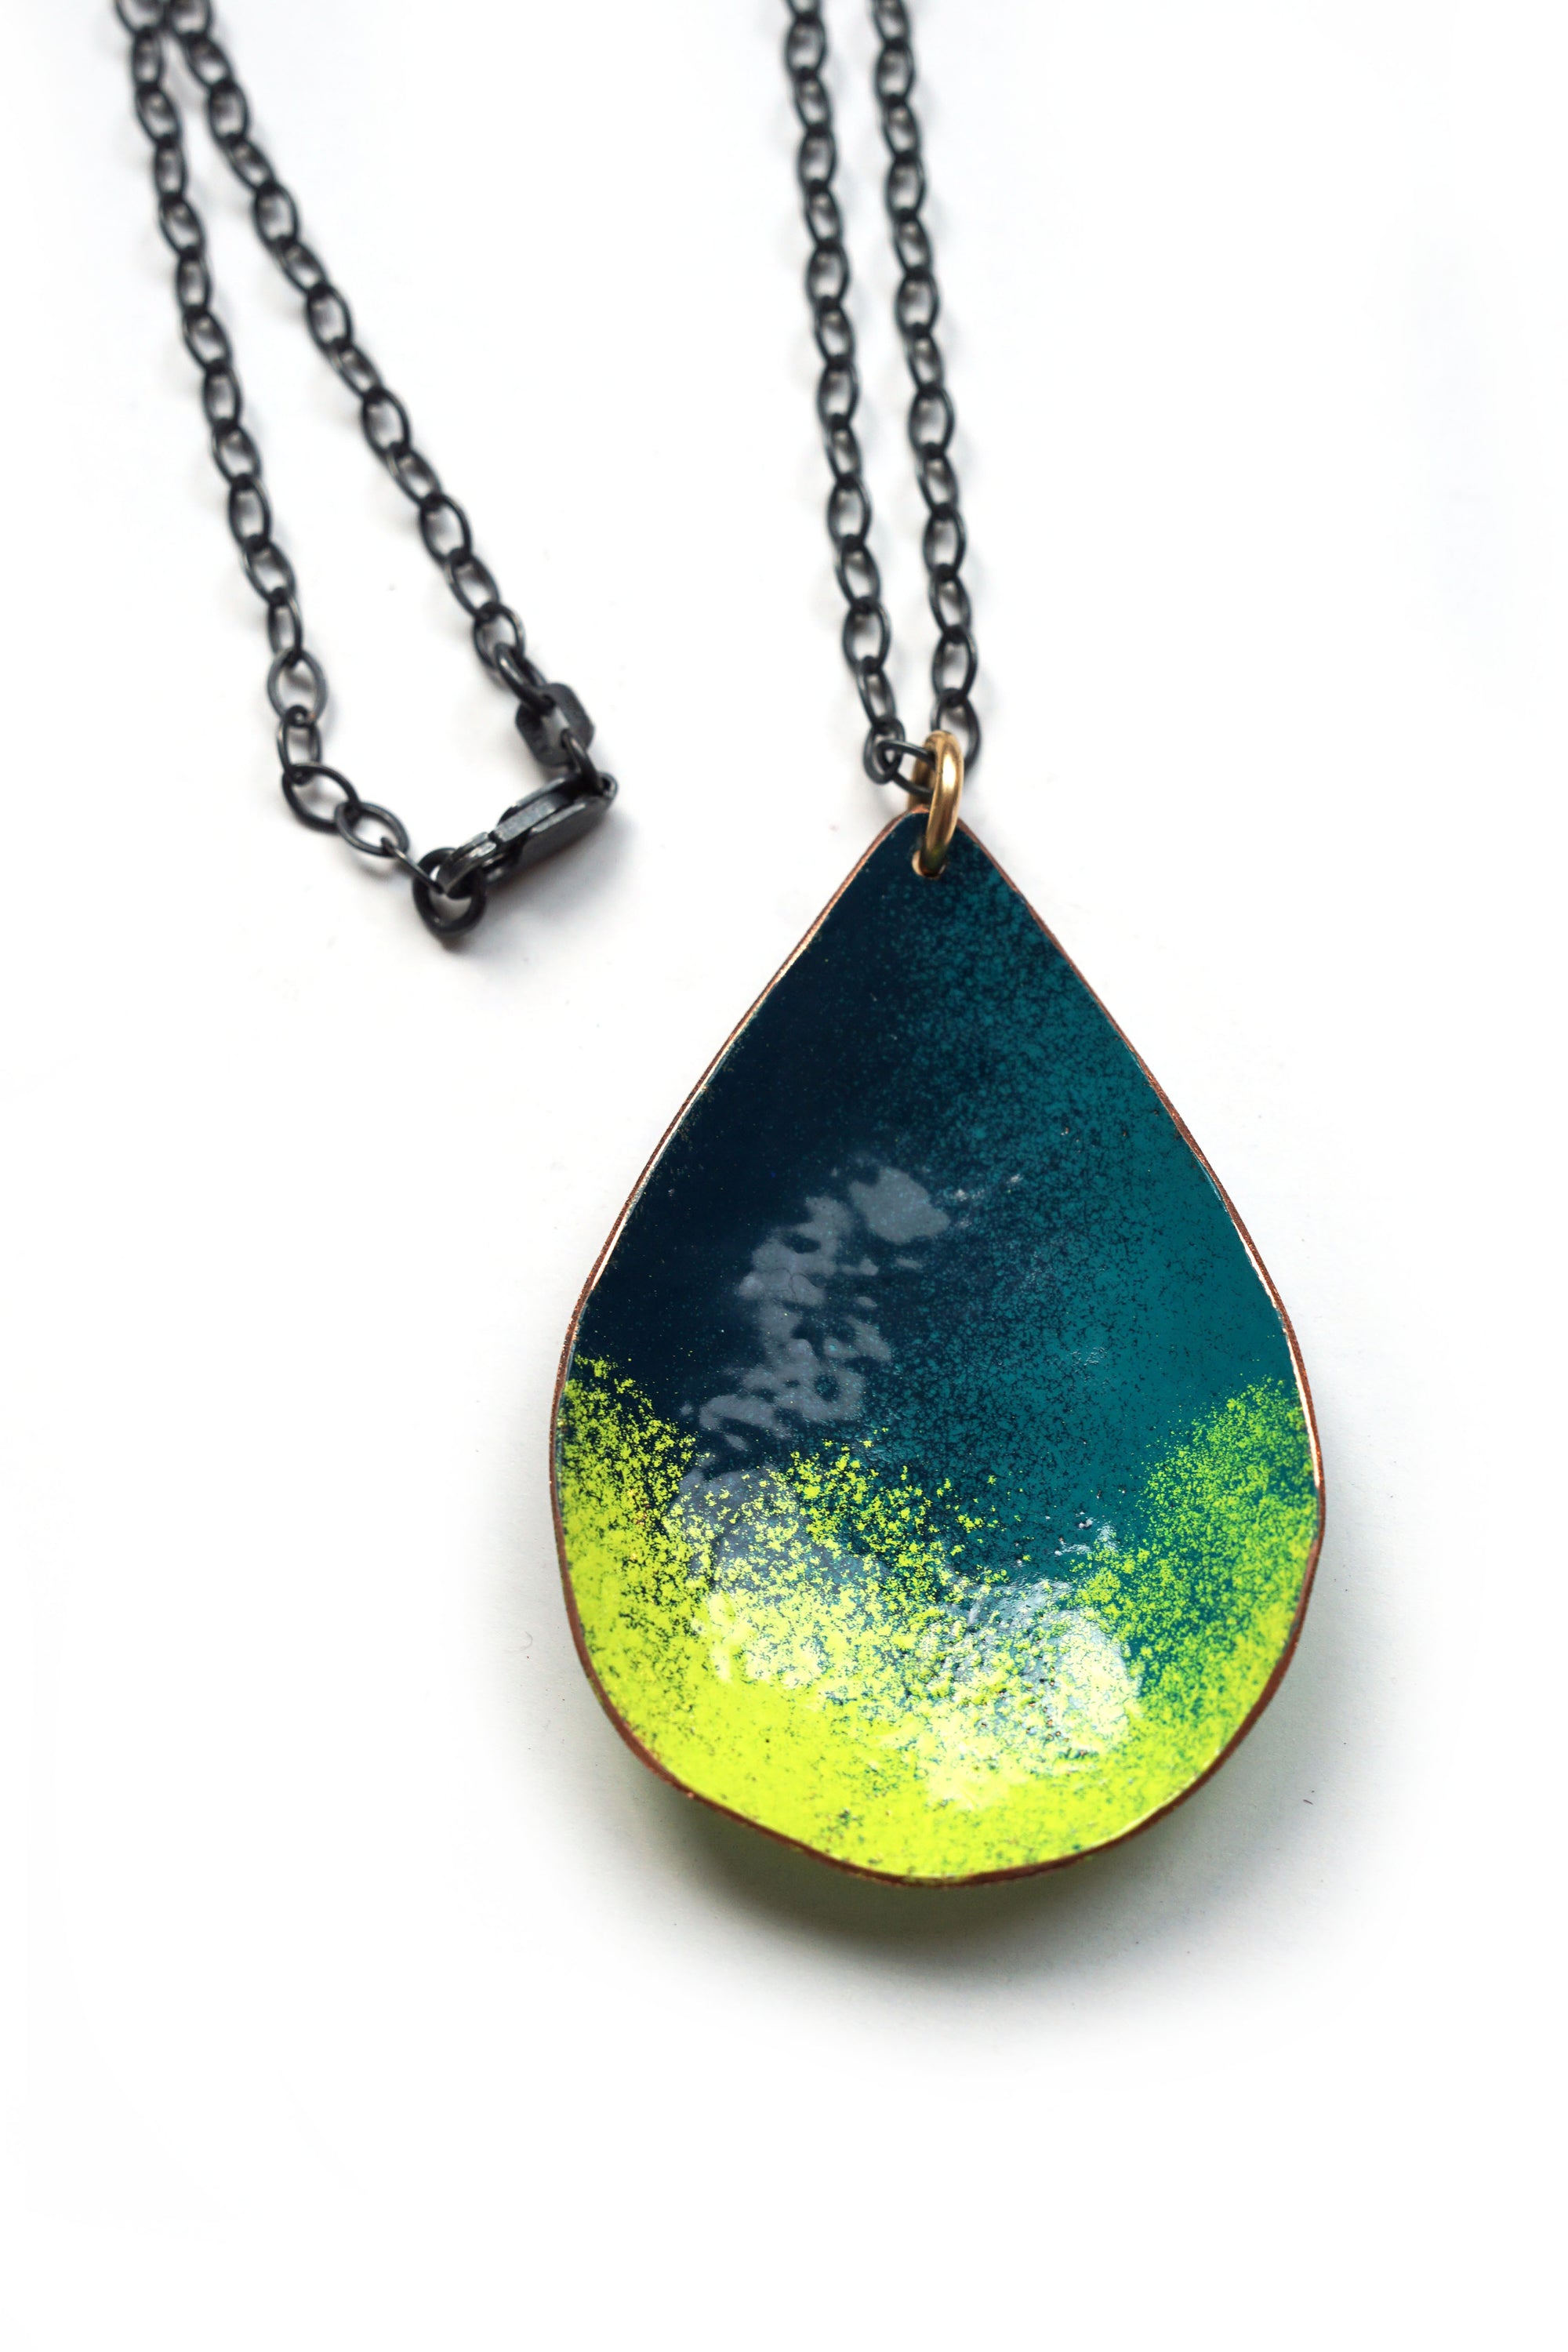 Chroma Pendant in Deep Ocean and Neon Chartreuse